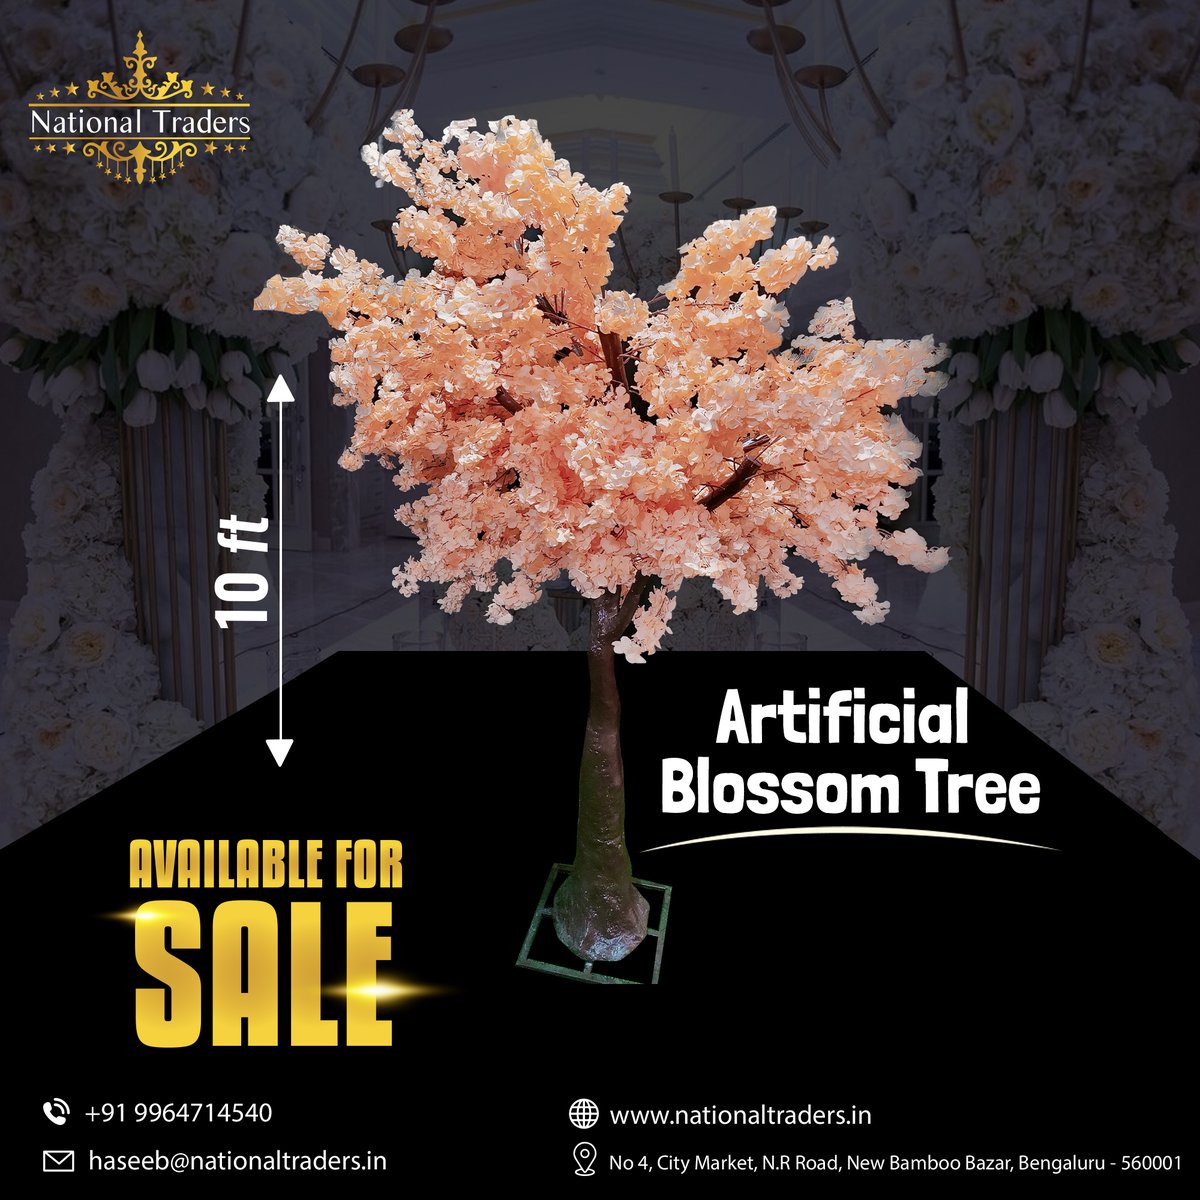 Artificial Blossom Tree Available For Sale!

𝐕𝐢𝐬𝐢𝐭: nationaltraders.in/product.../art…

#nationaltraders #blossomtree #artificialtrees #artificialblossomtree  #decorprops #weddingdecorideas #wholesalesuppliers #weddingdecorideas